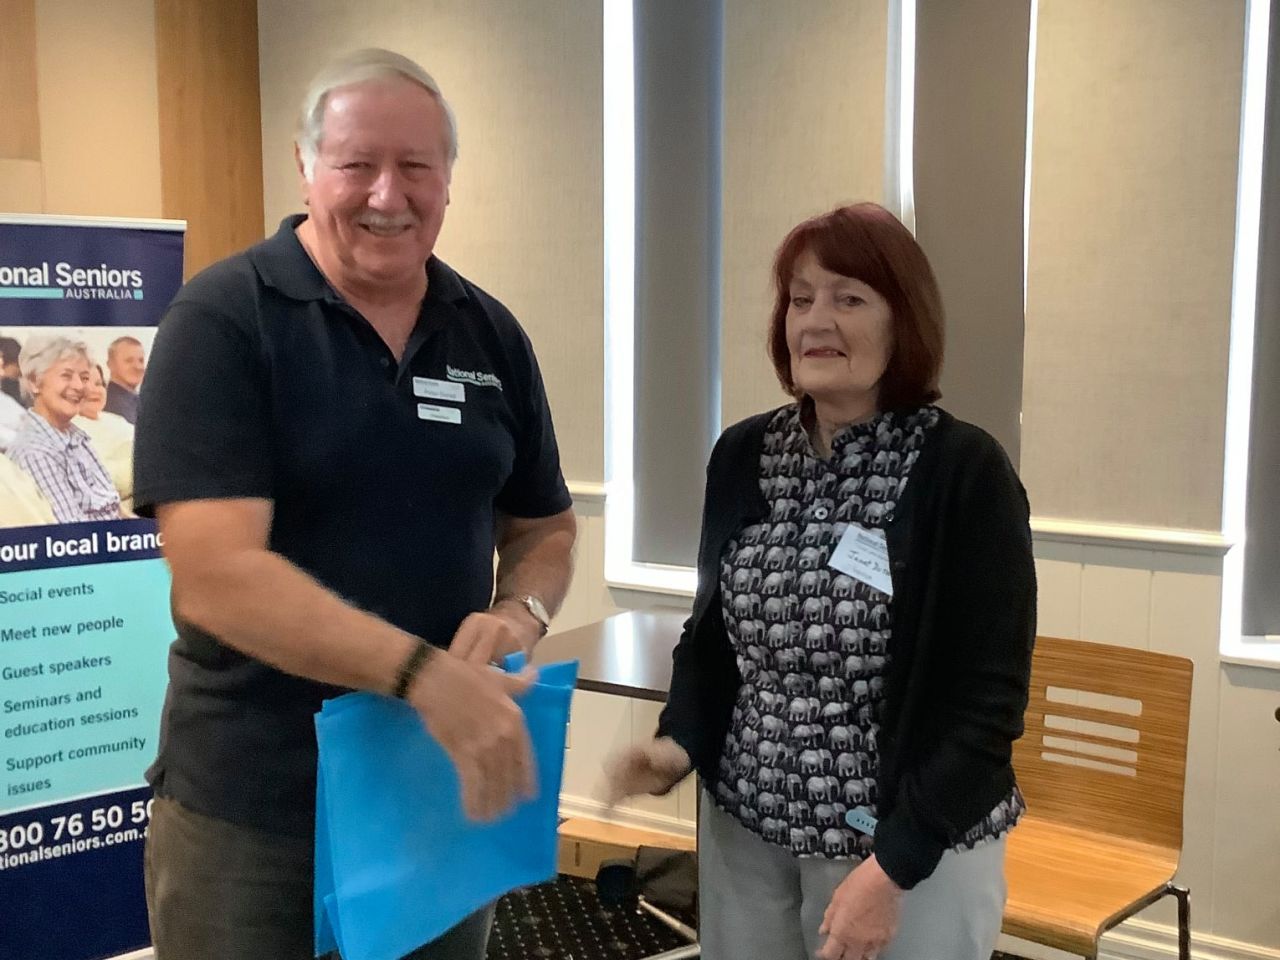 Welcoming a new member at September 2021 Branch meeting